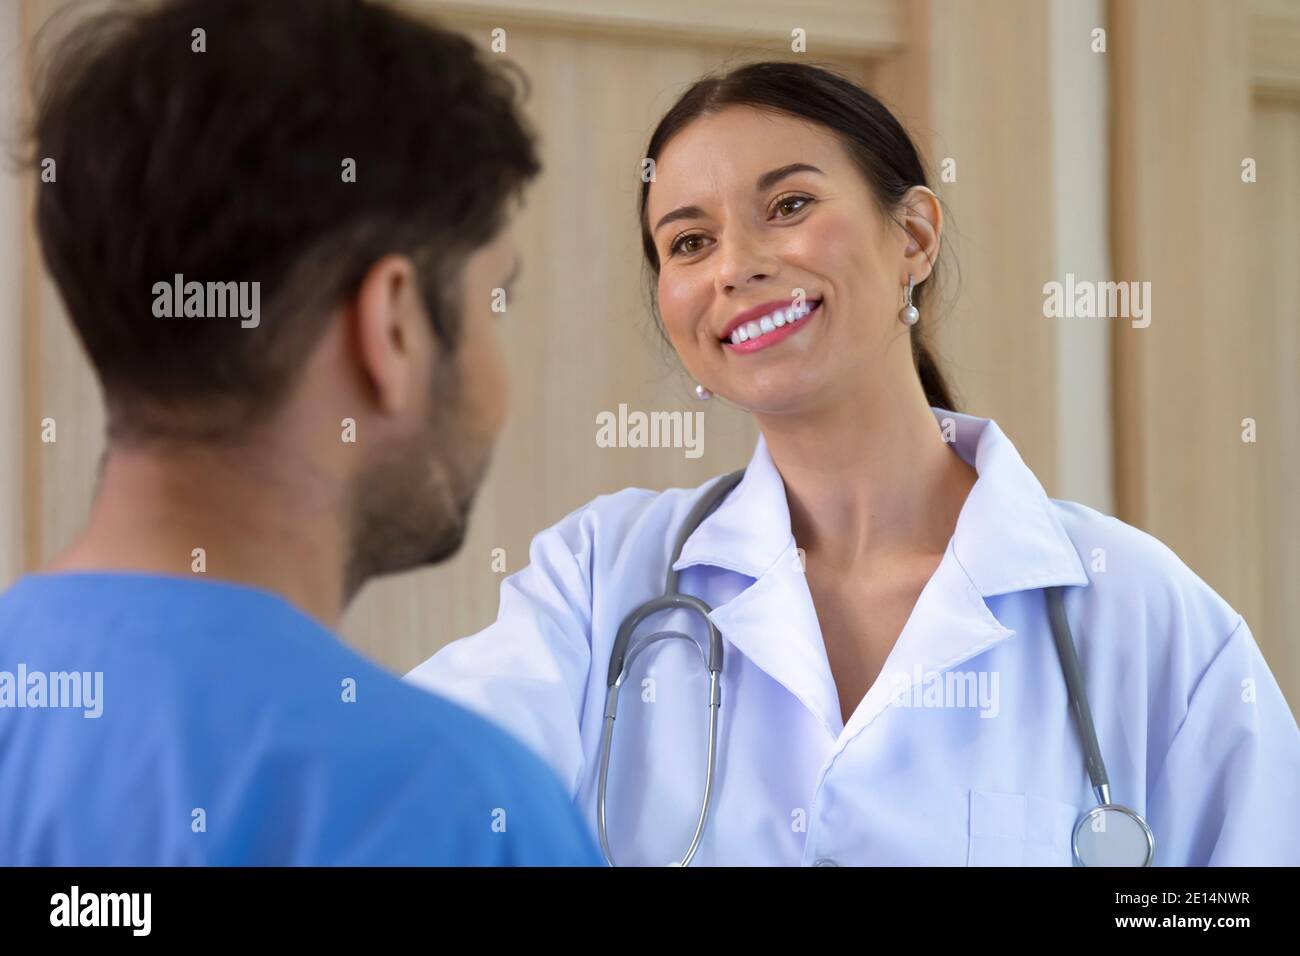 smiling female doctor helping support and reassuring patient after cancer surgical treatment recovery. medical and healthcare concept. Stock Photo